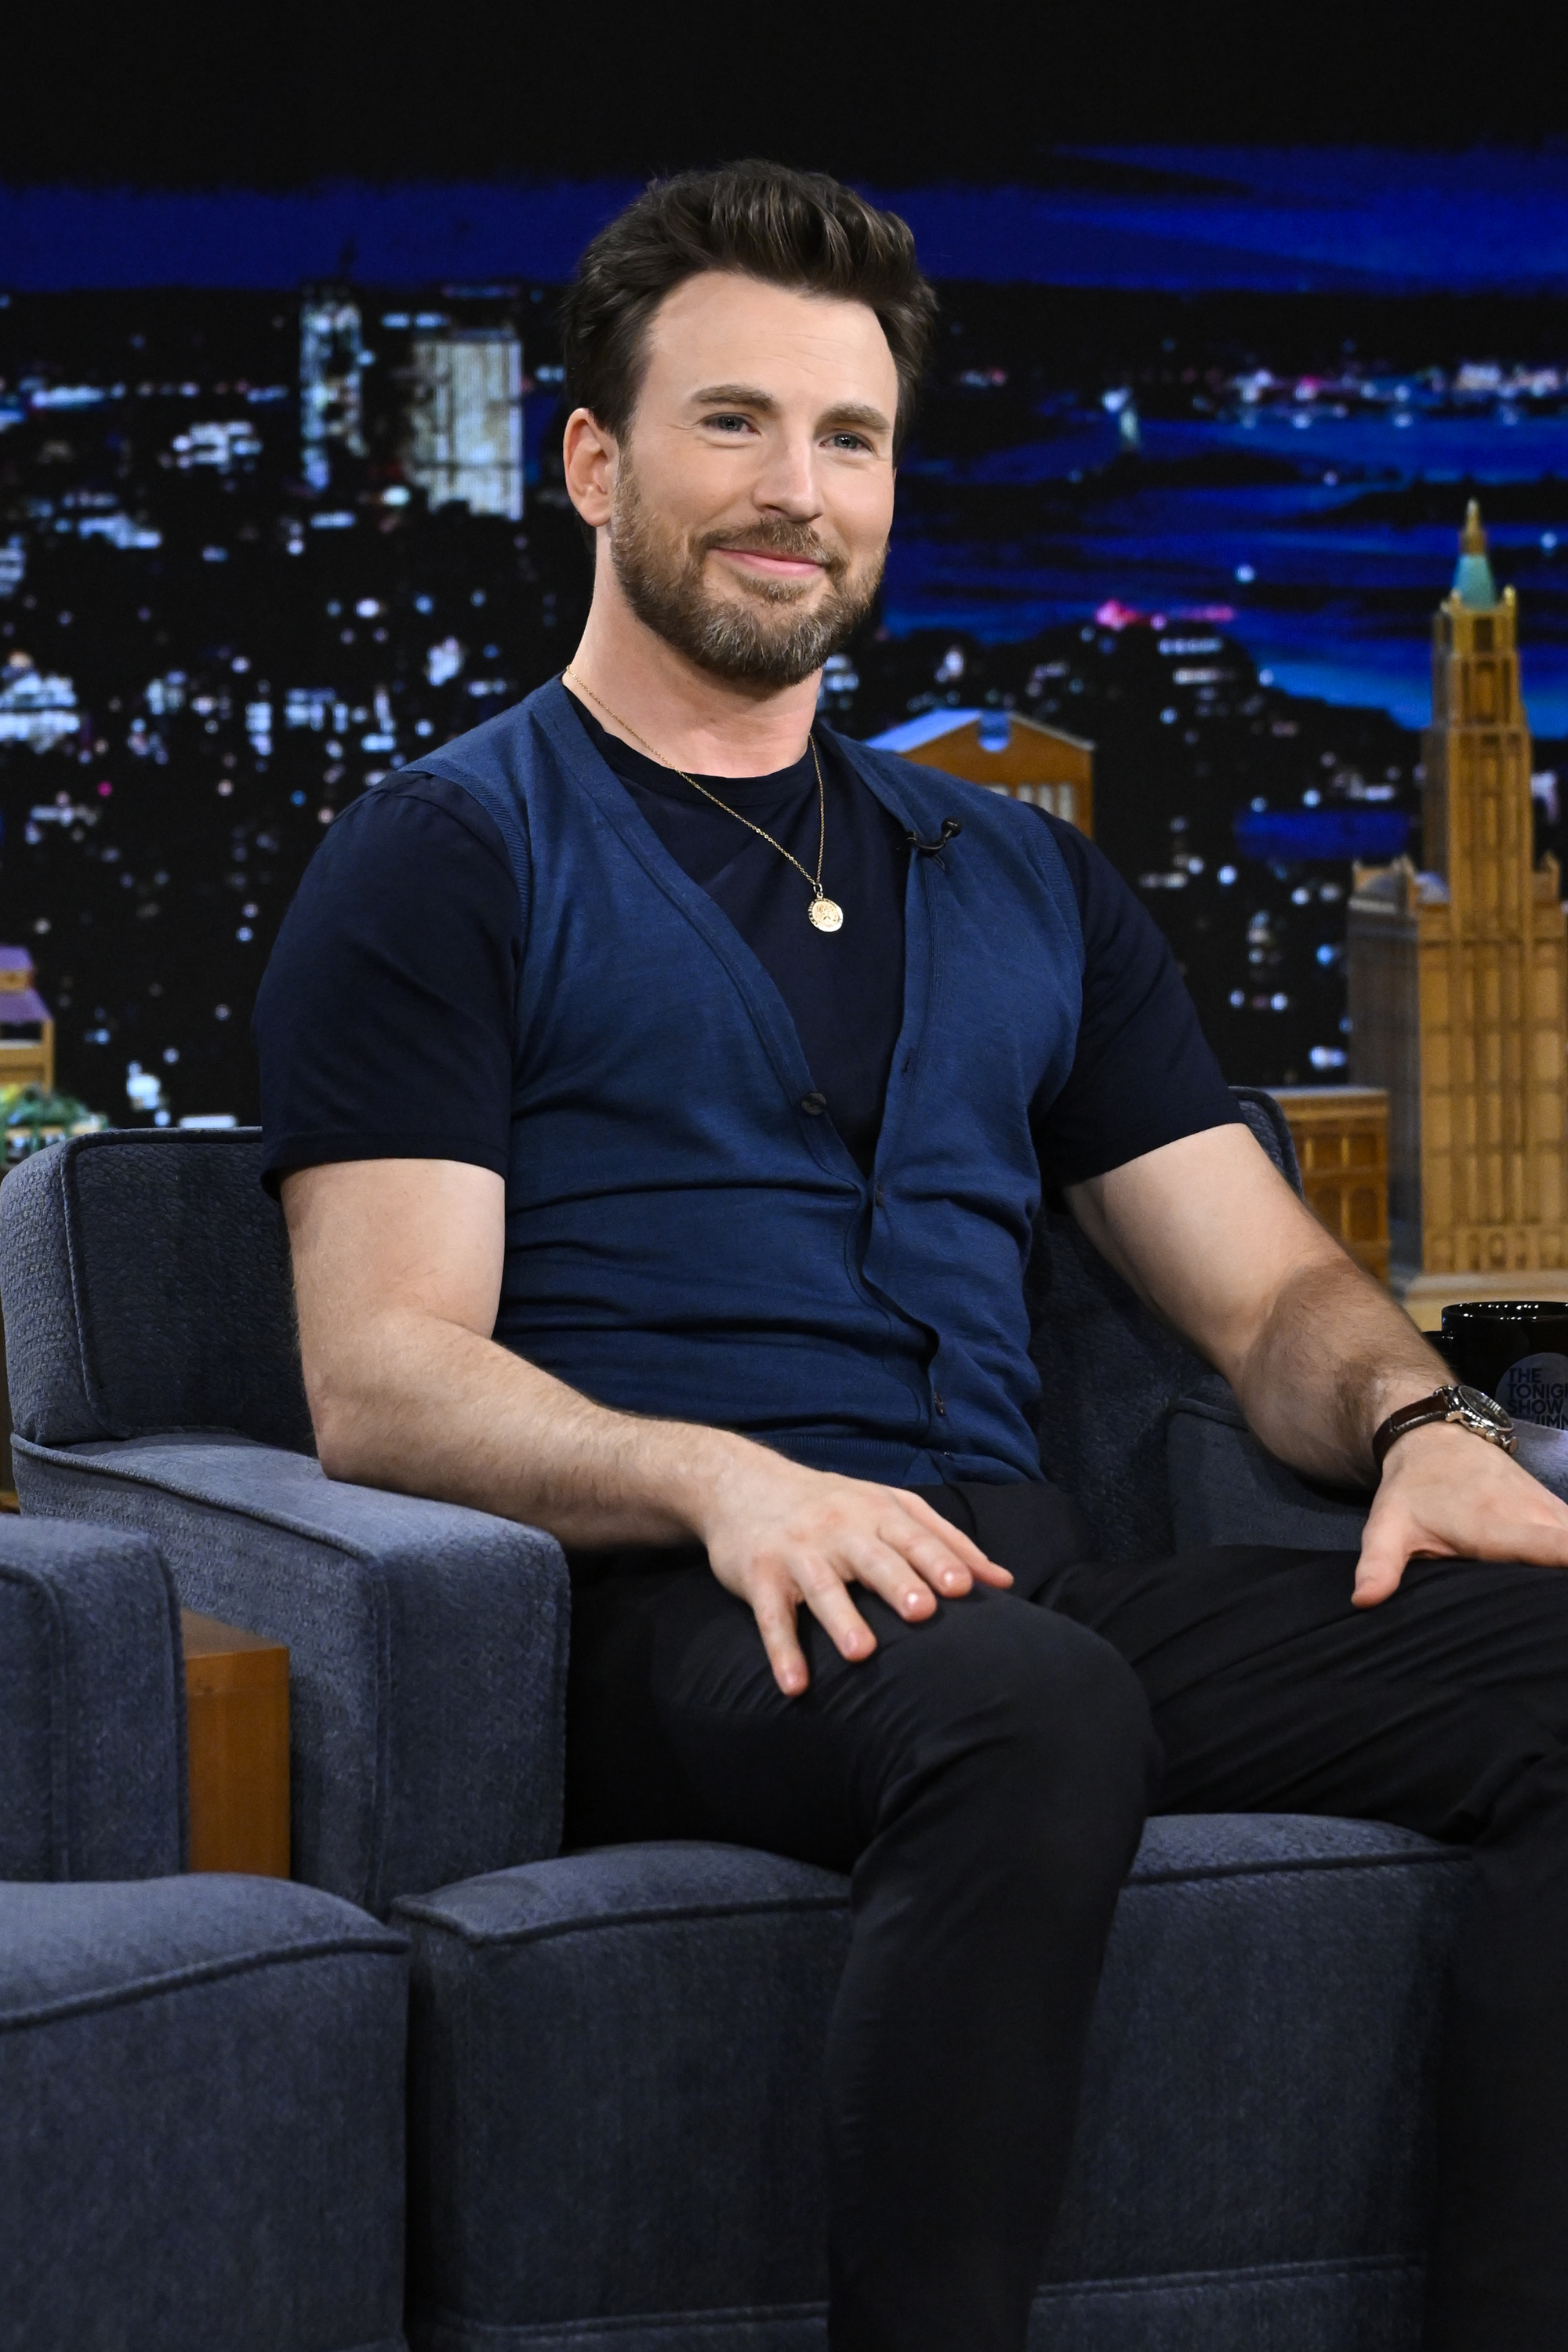 Chris sitting onstage for a late night TV talk show